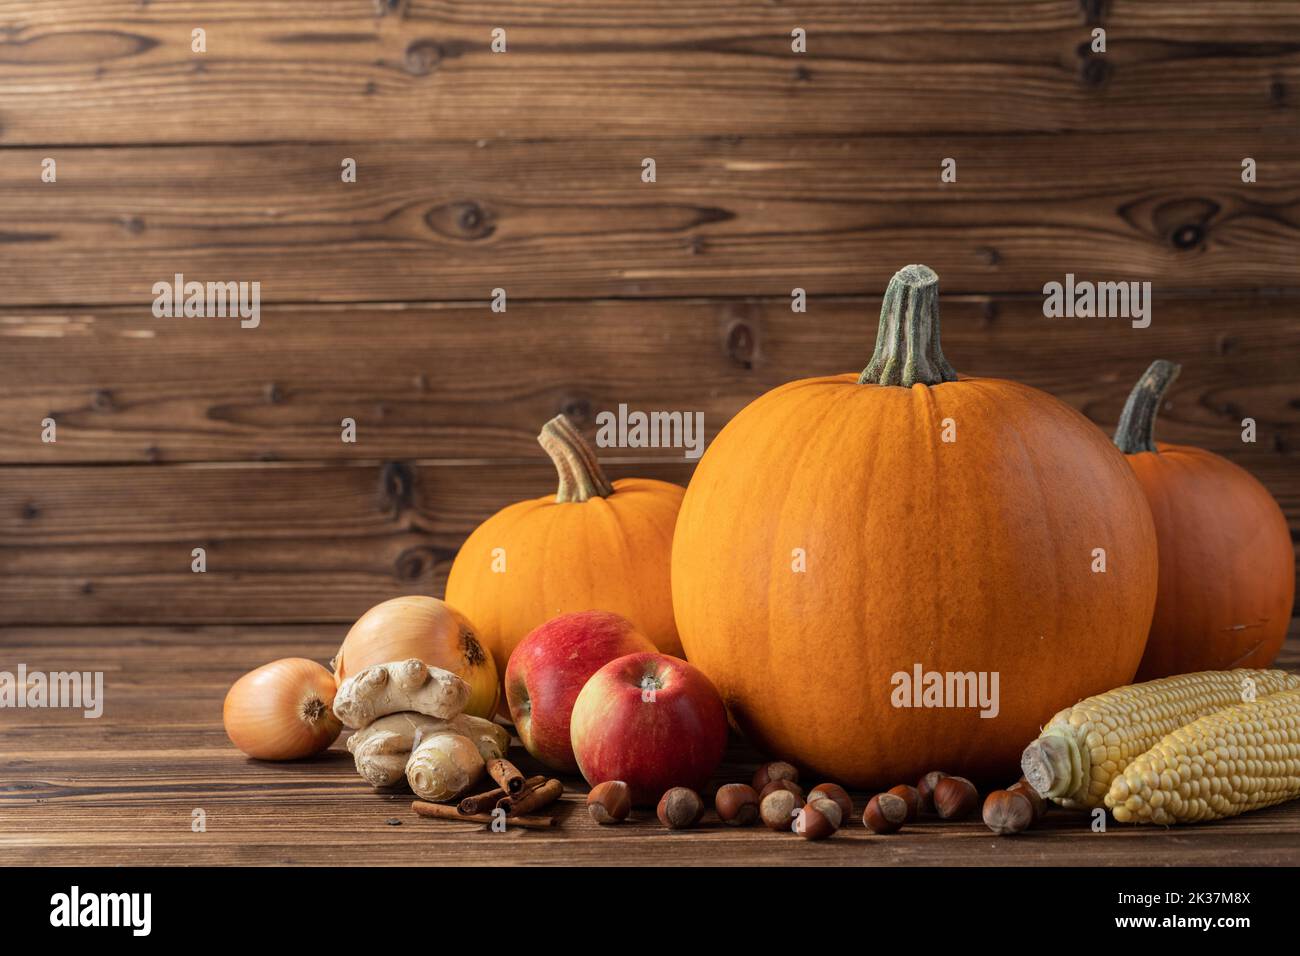 Fall harvest still life with pumpkins in autumn colors on wooden background Stock Photo